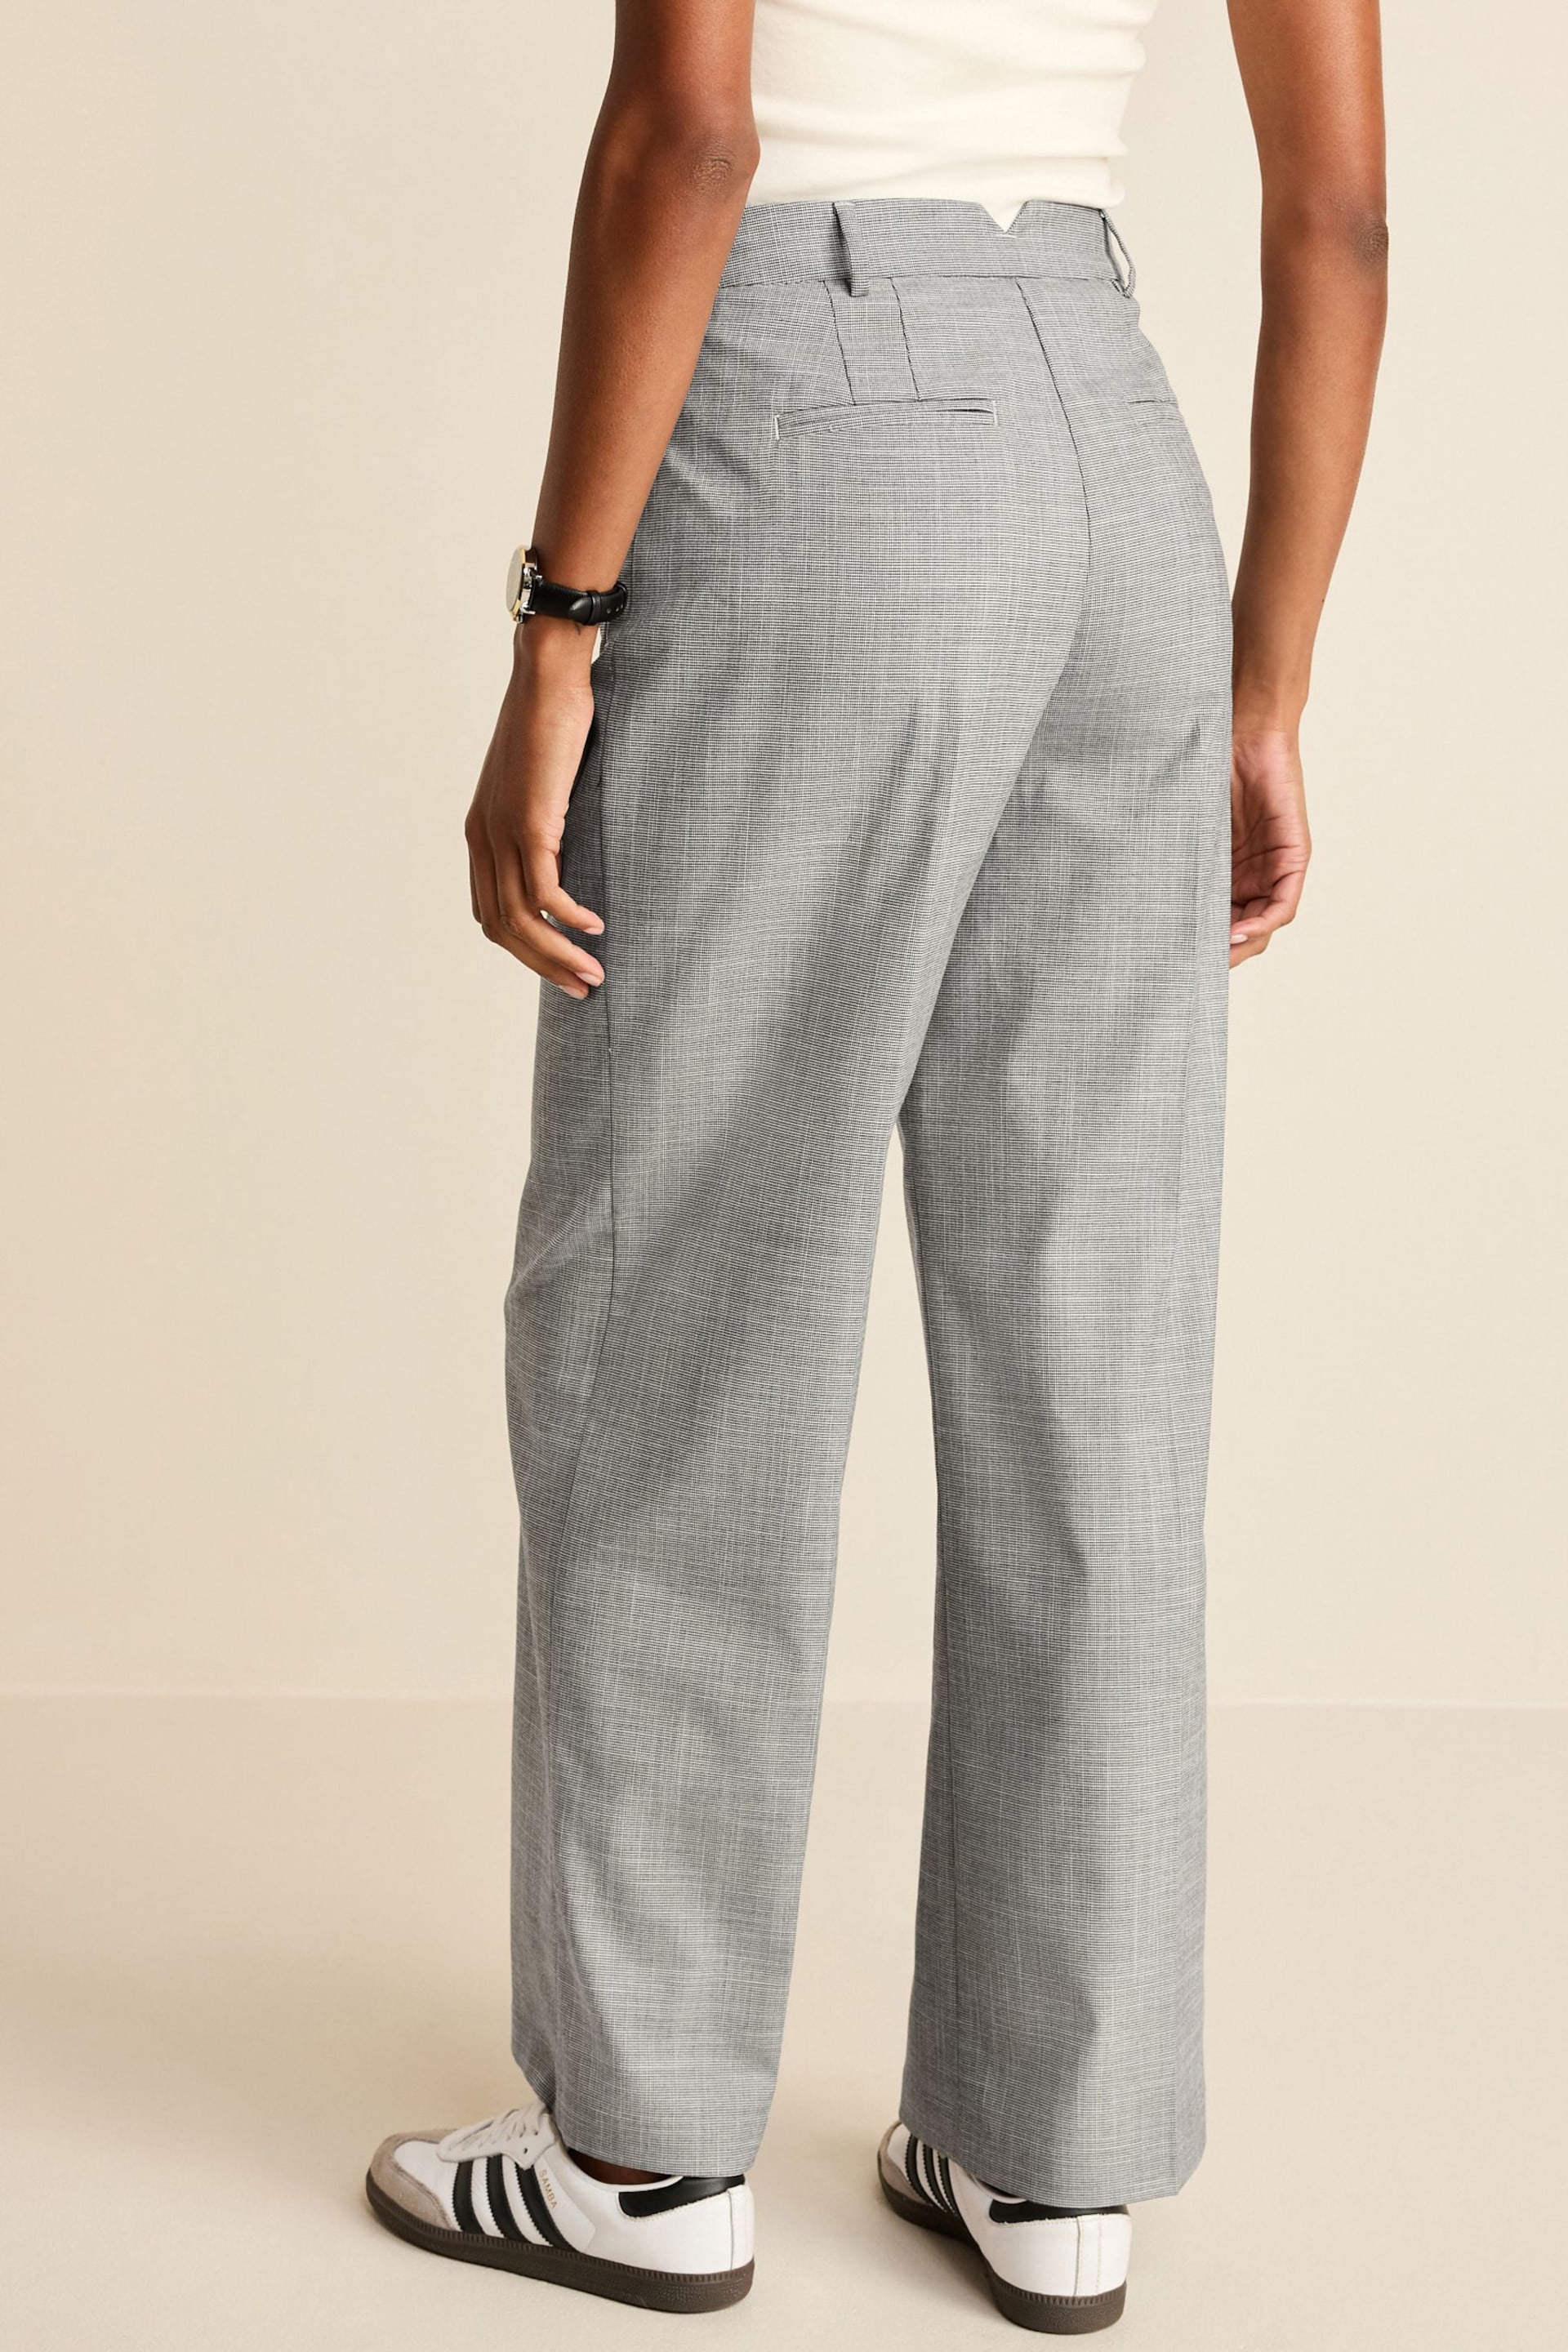 Black/White Check Tailored Check Wide Leg Trousers - Image 4 of 7